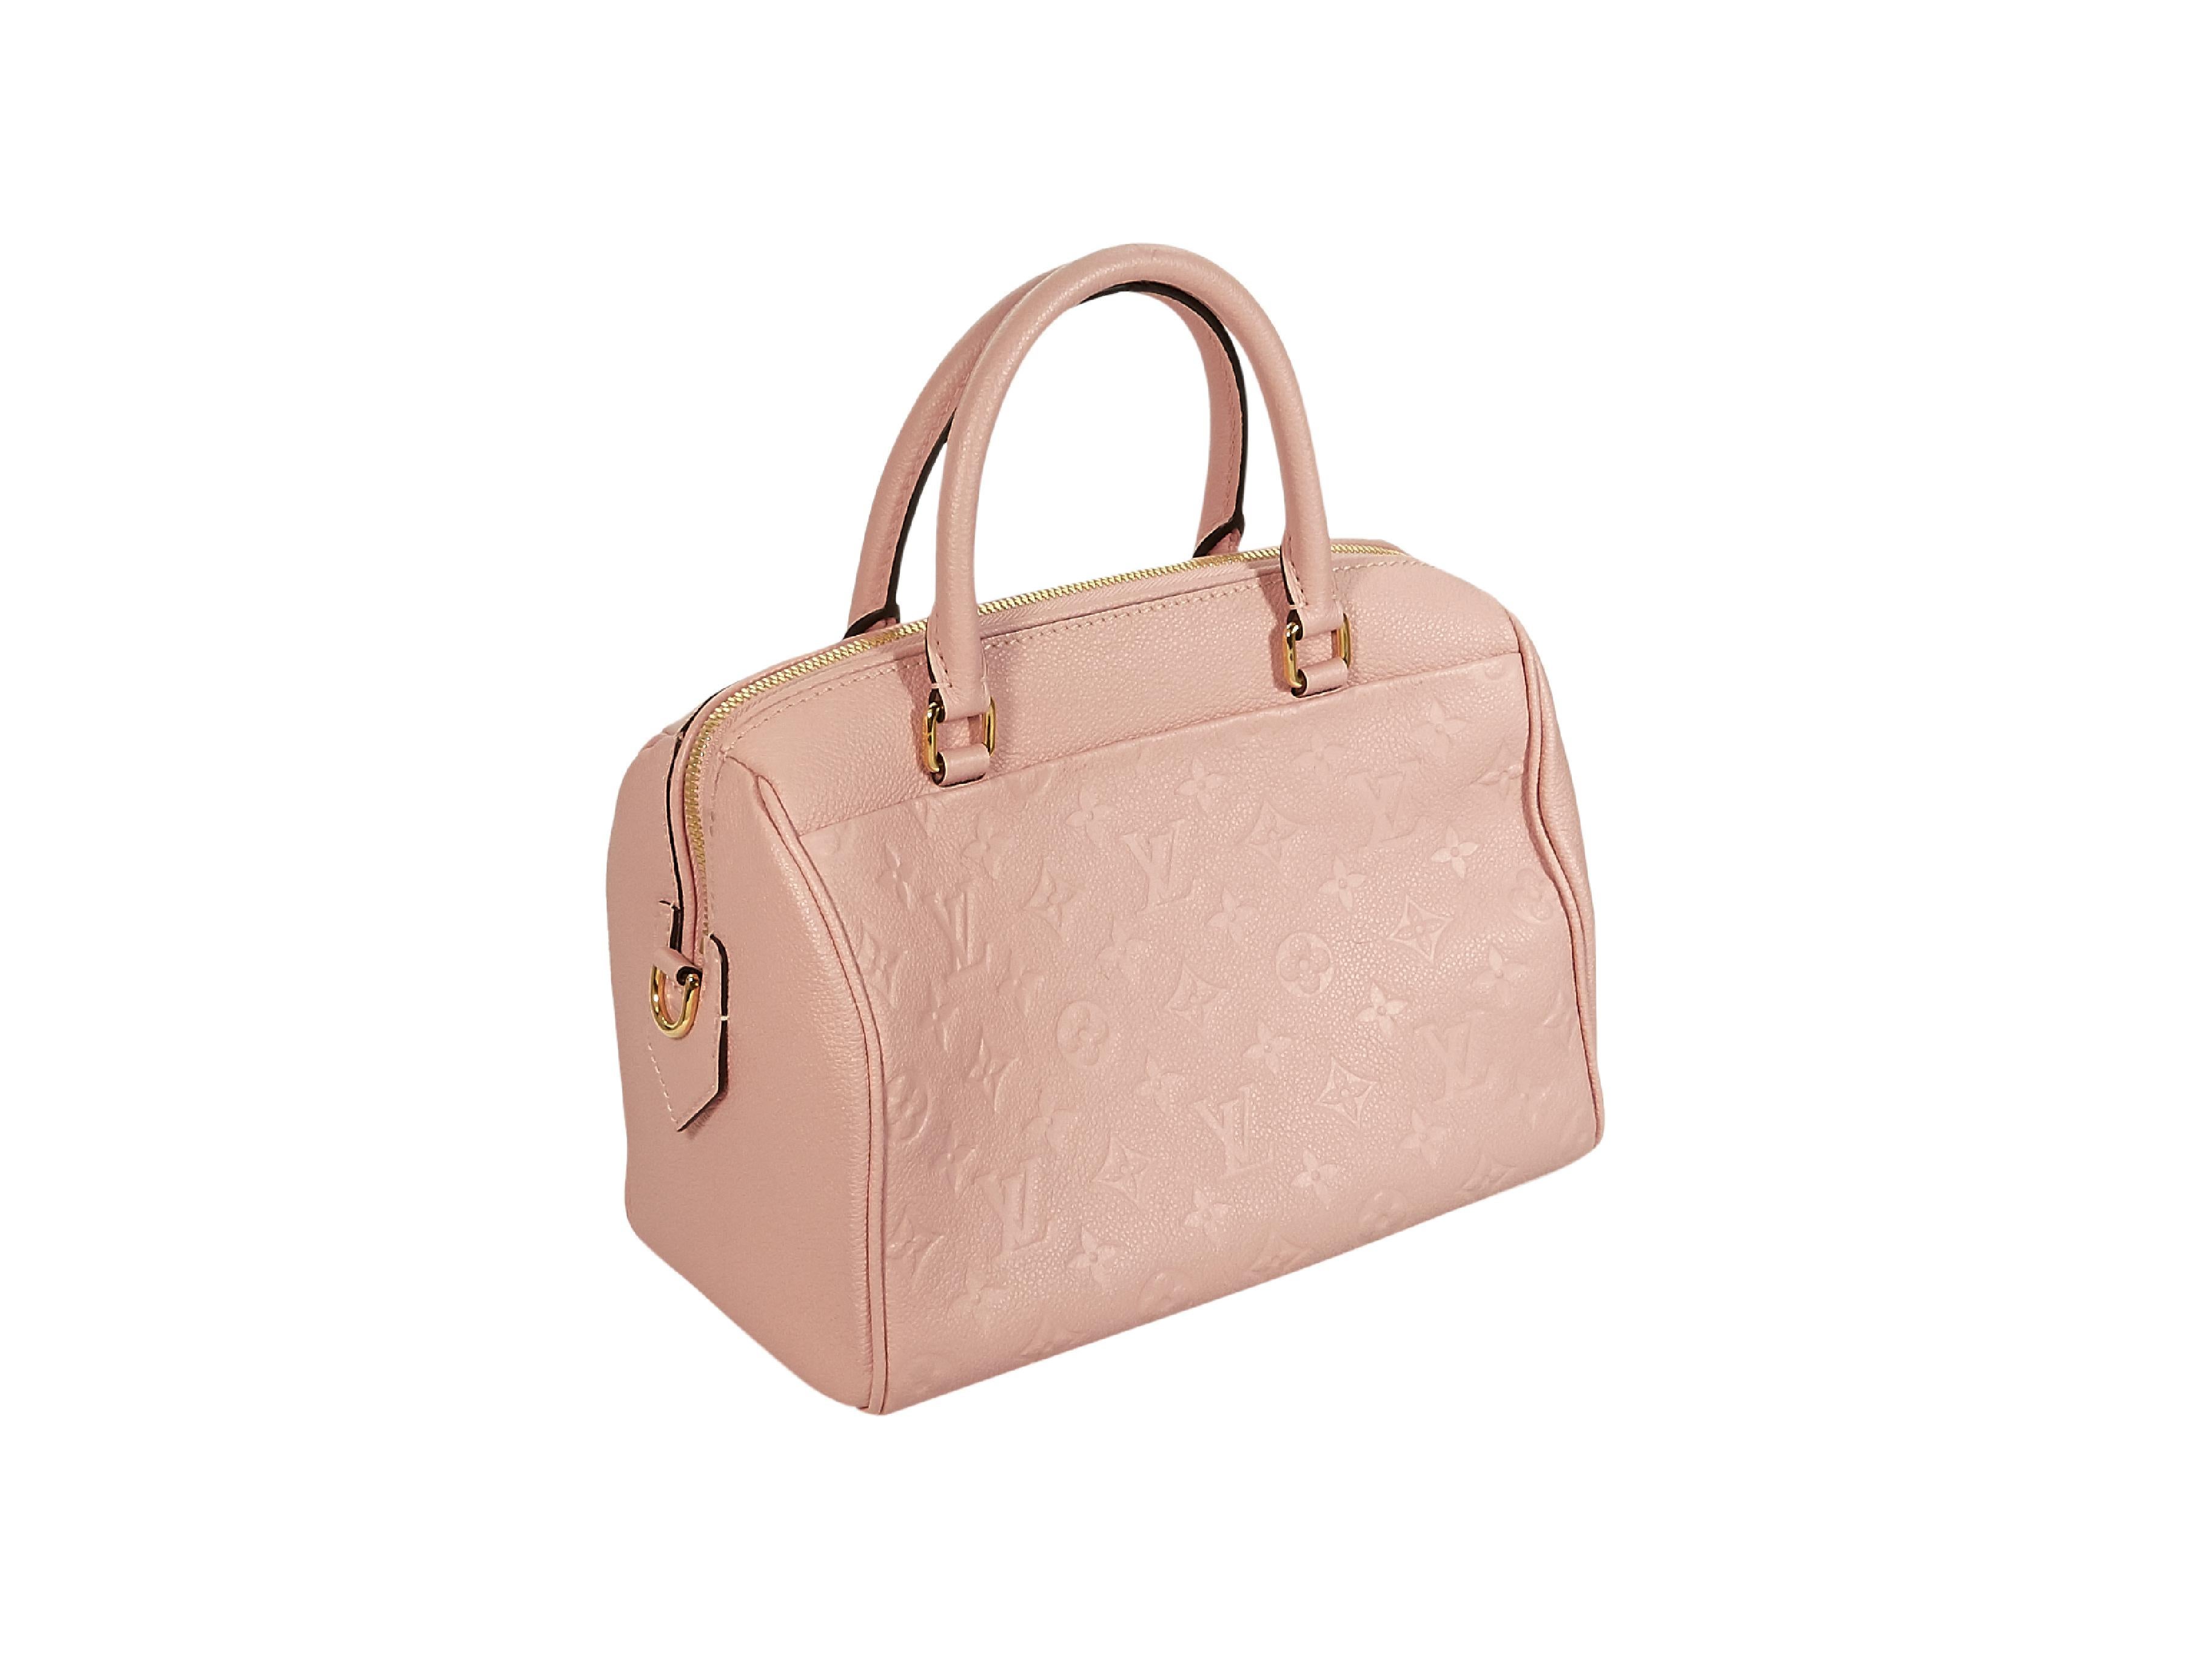 Product details:  Pink monogram leather Speedy handbag by Louis Vuitton.  Circa 2017.  Dual carry handles.  Top zip closure with lock-and-key.  Lined interior with inner slide and zip pockets.  Goldtone hardware.  10